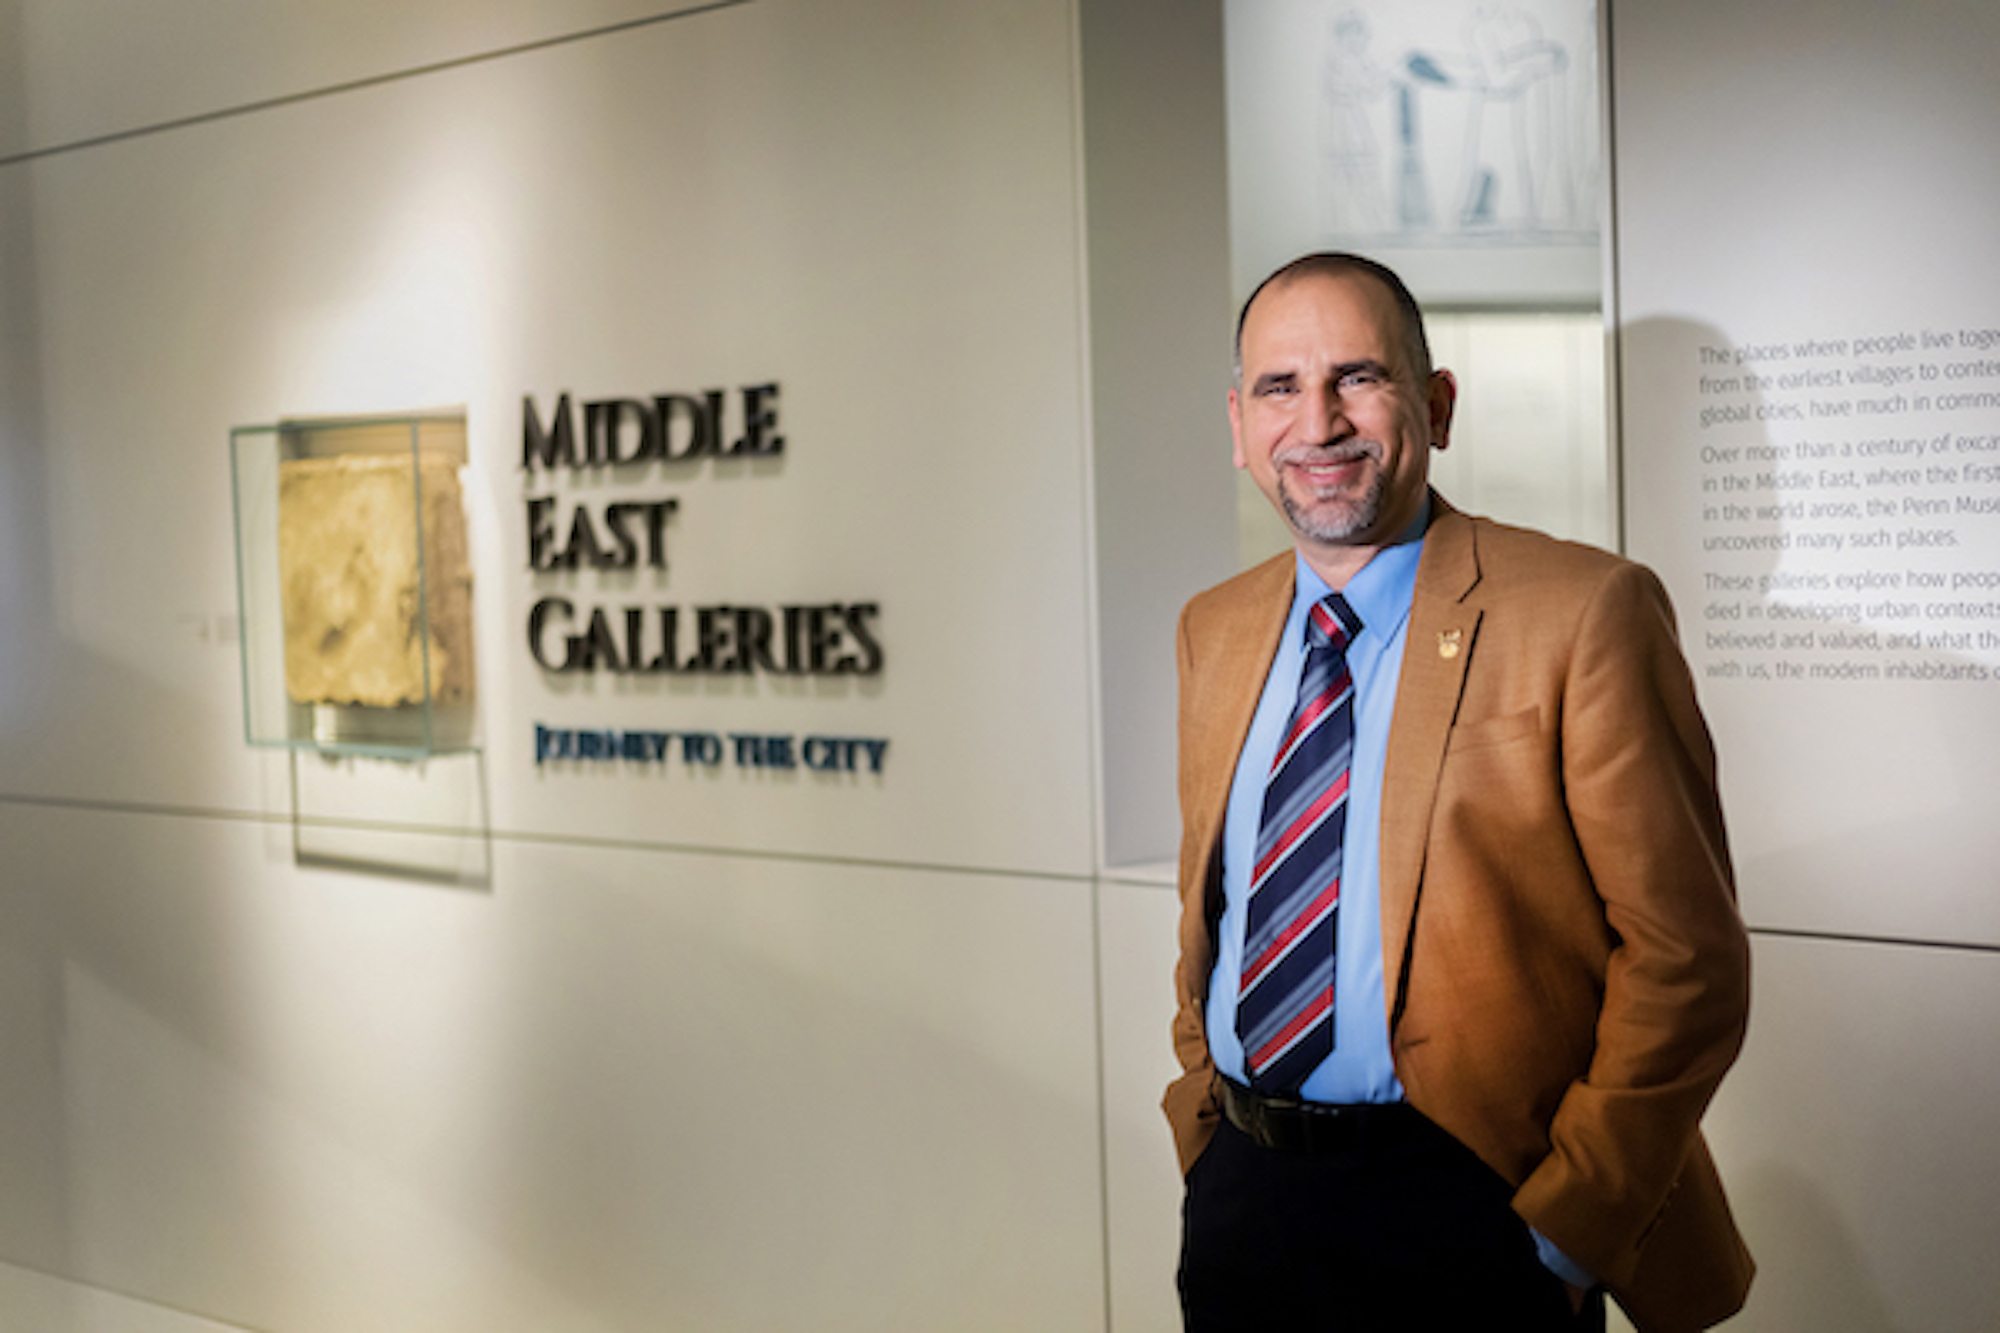 Yaroub Al-Obaidi stands in front of a sign reading Middle East Galleries inside the Penn Museum.